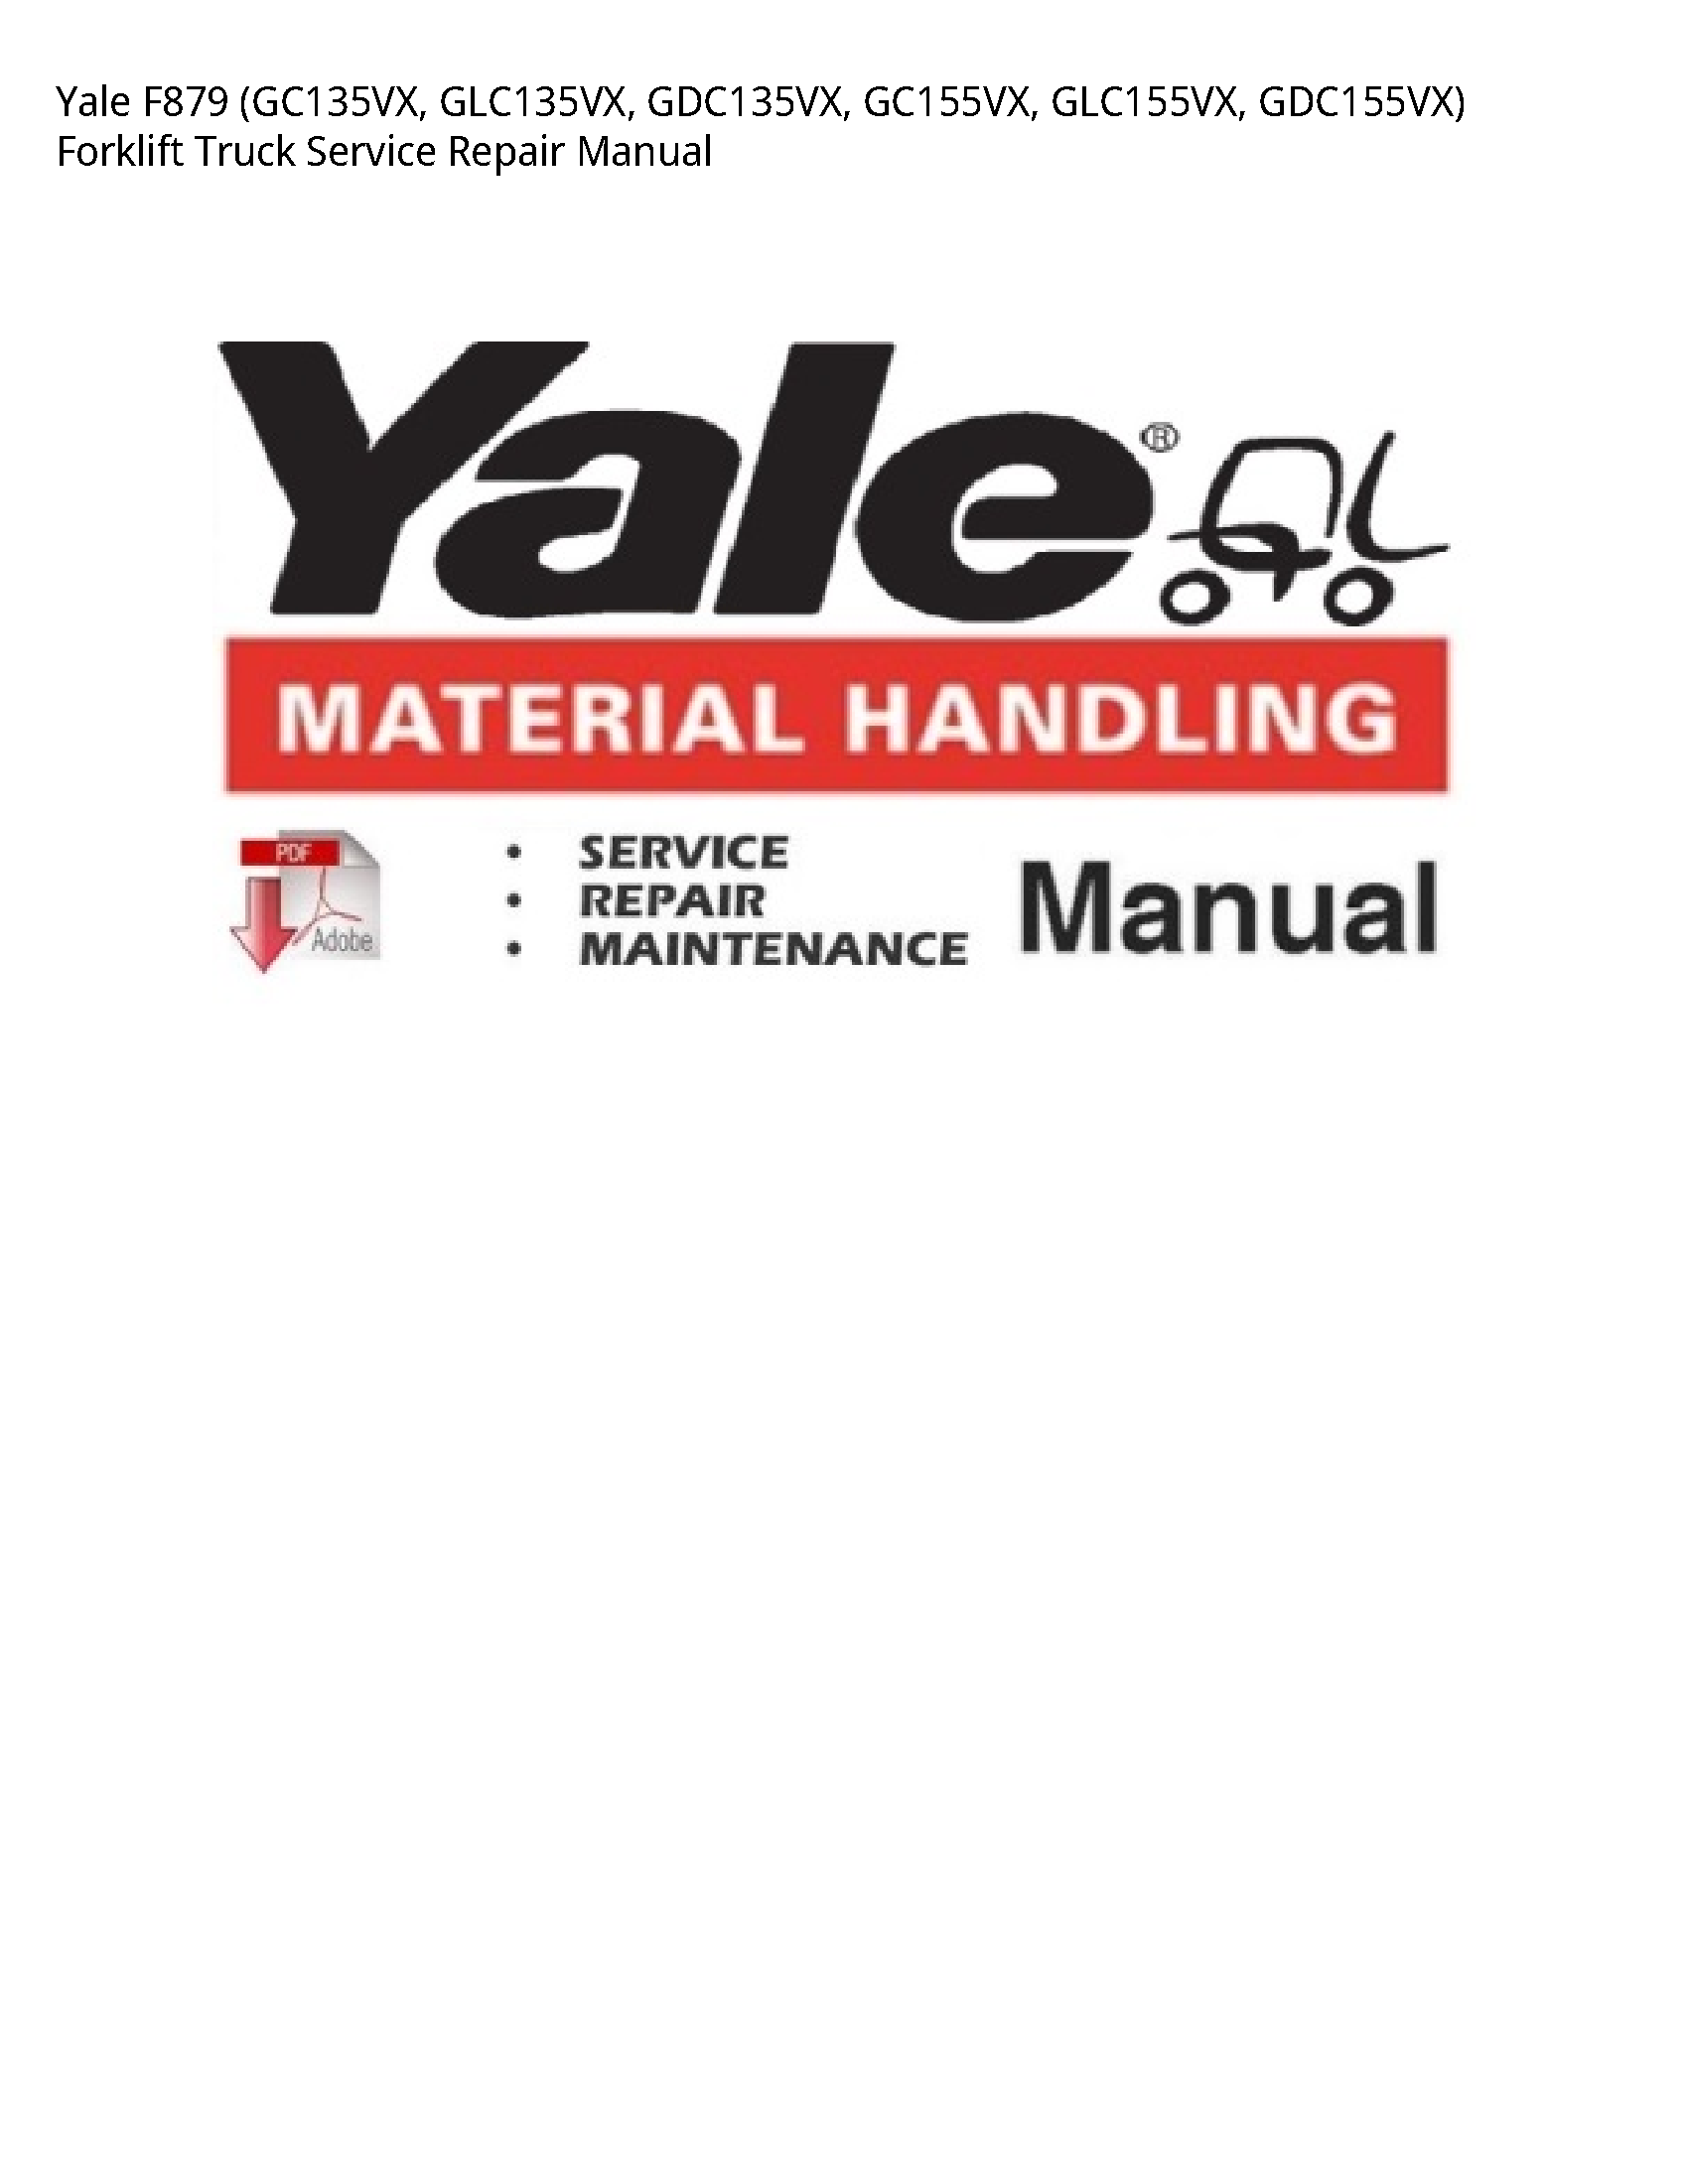 Yale F879 Forklift Truck manual